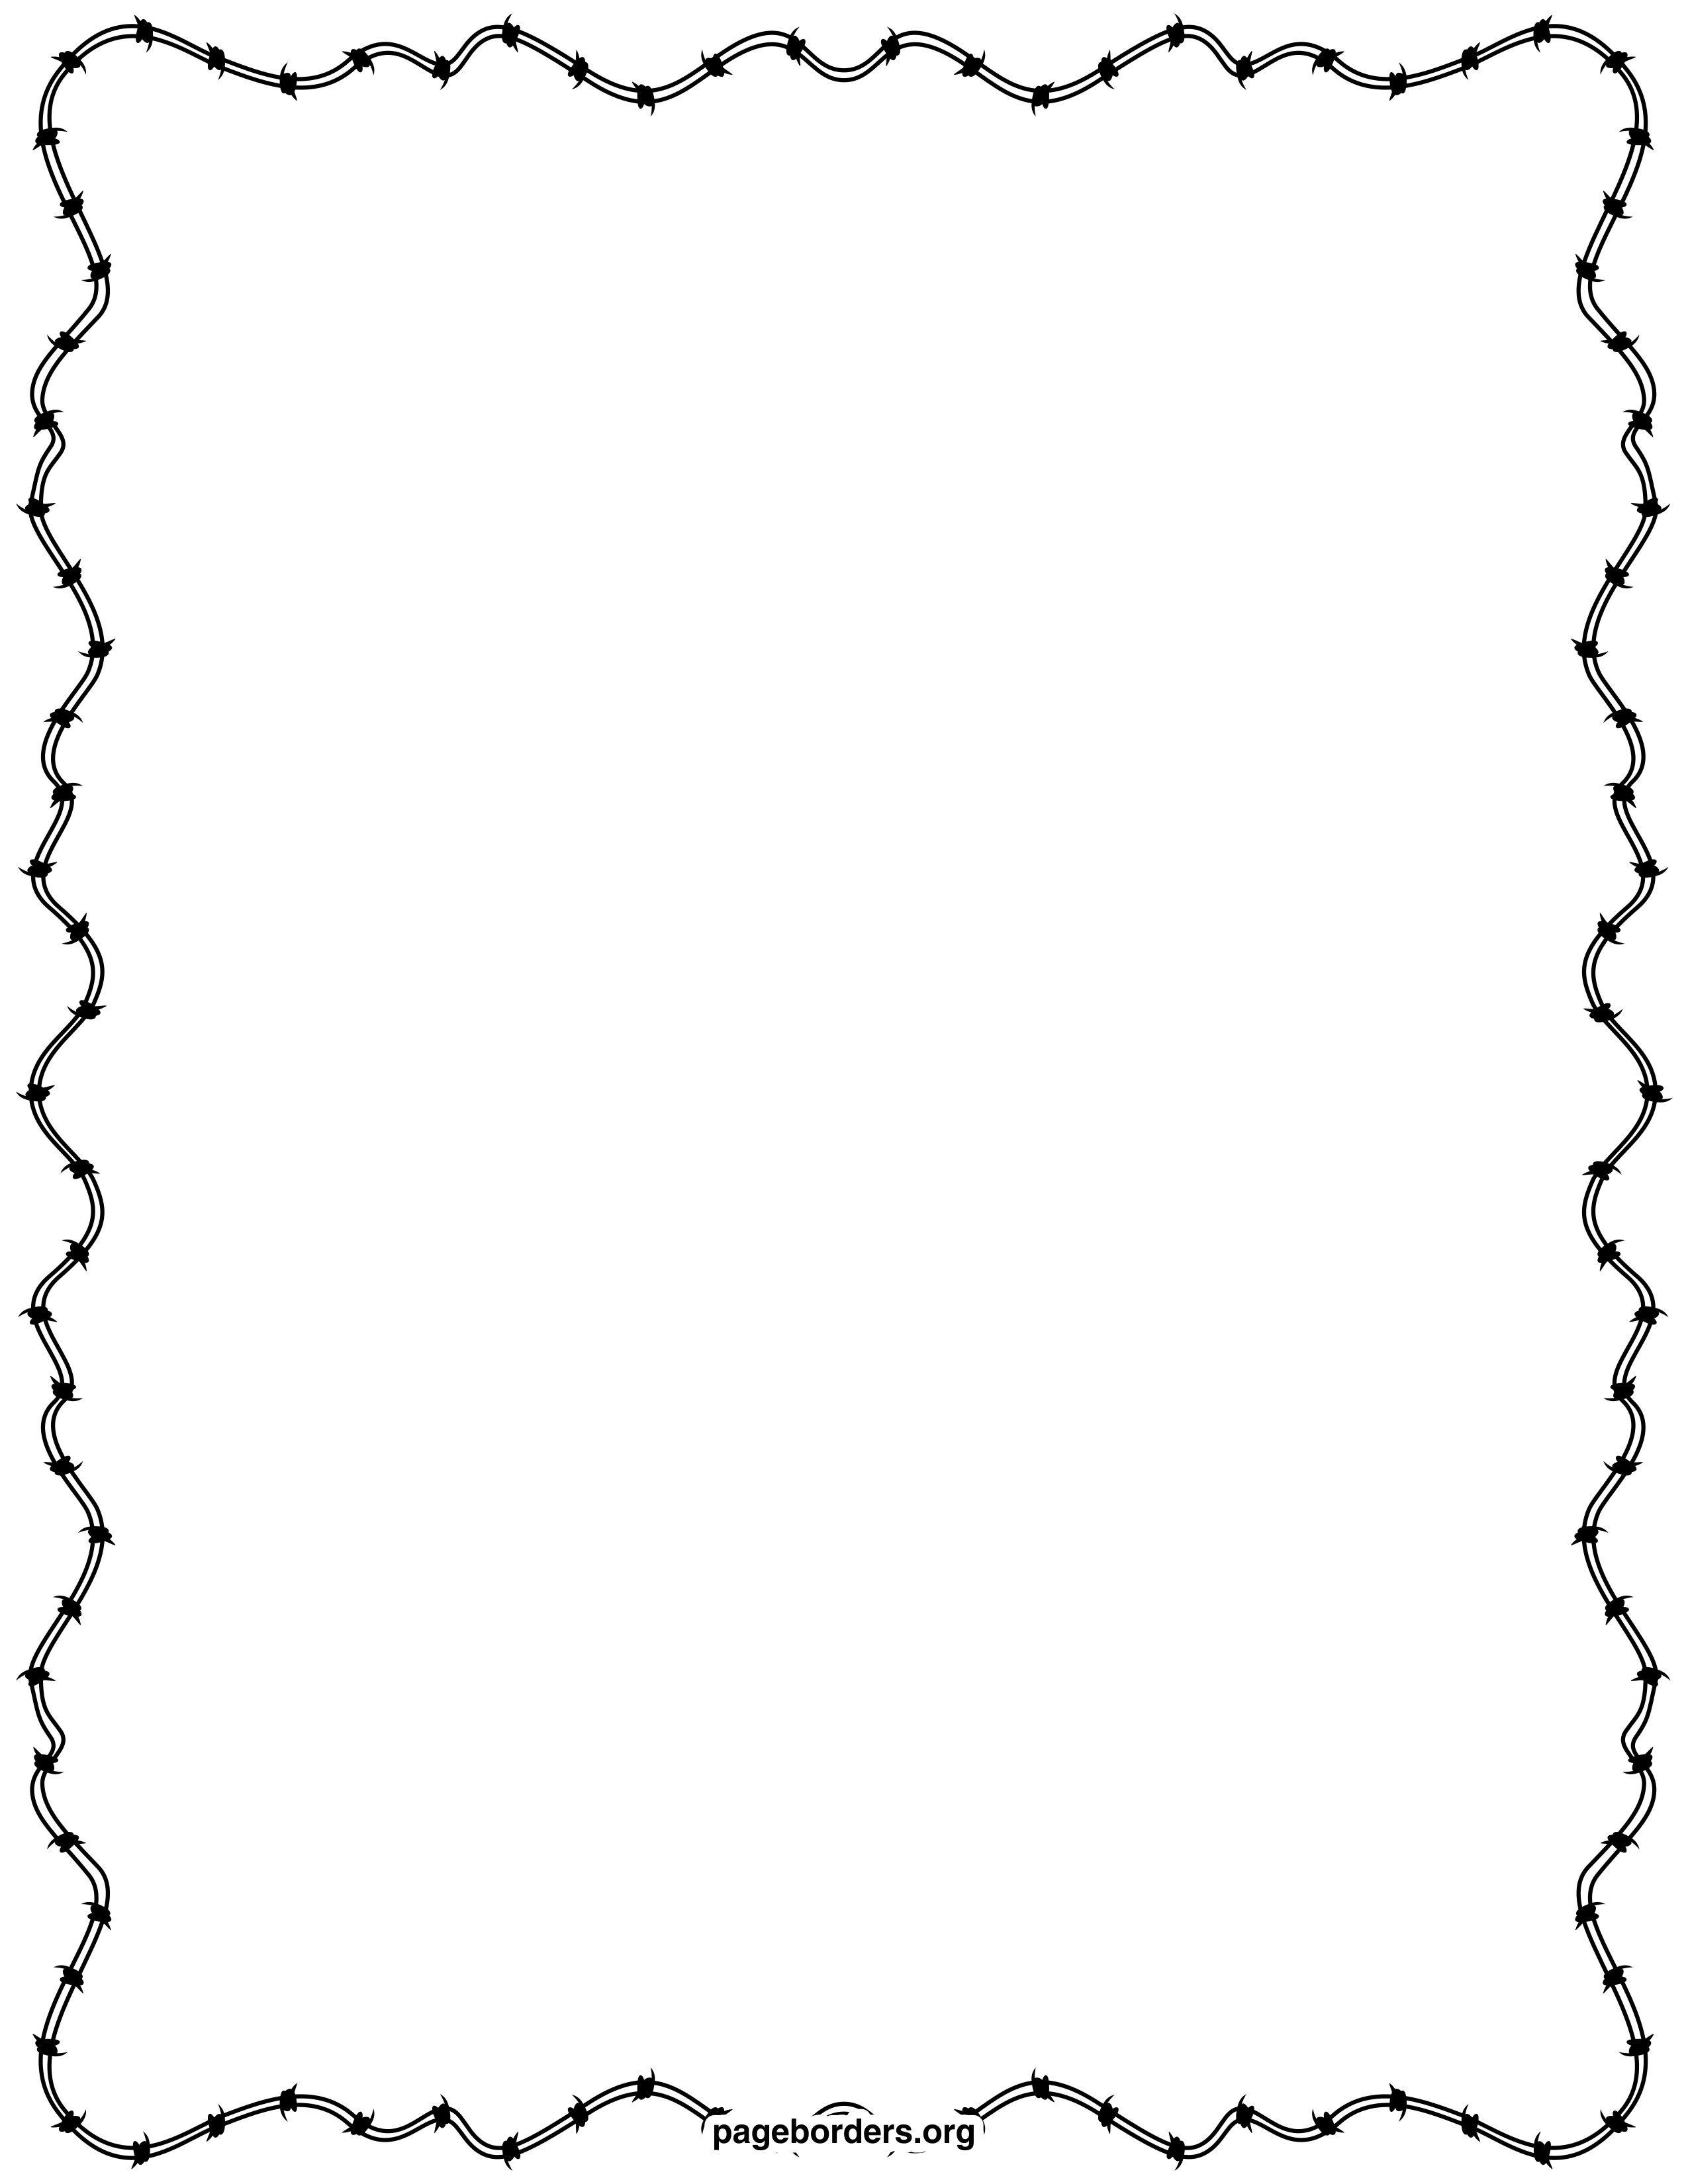 Barbed Wire Border: Clip Art, Page Border, and Vector Graphics